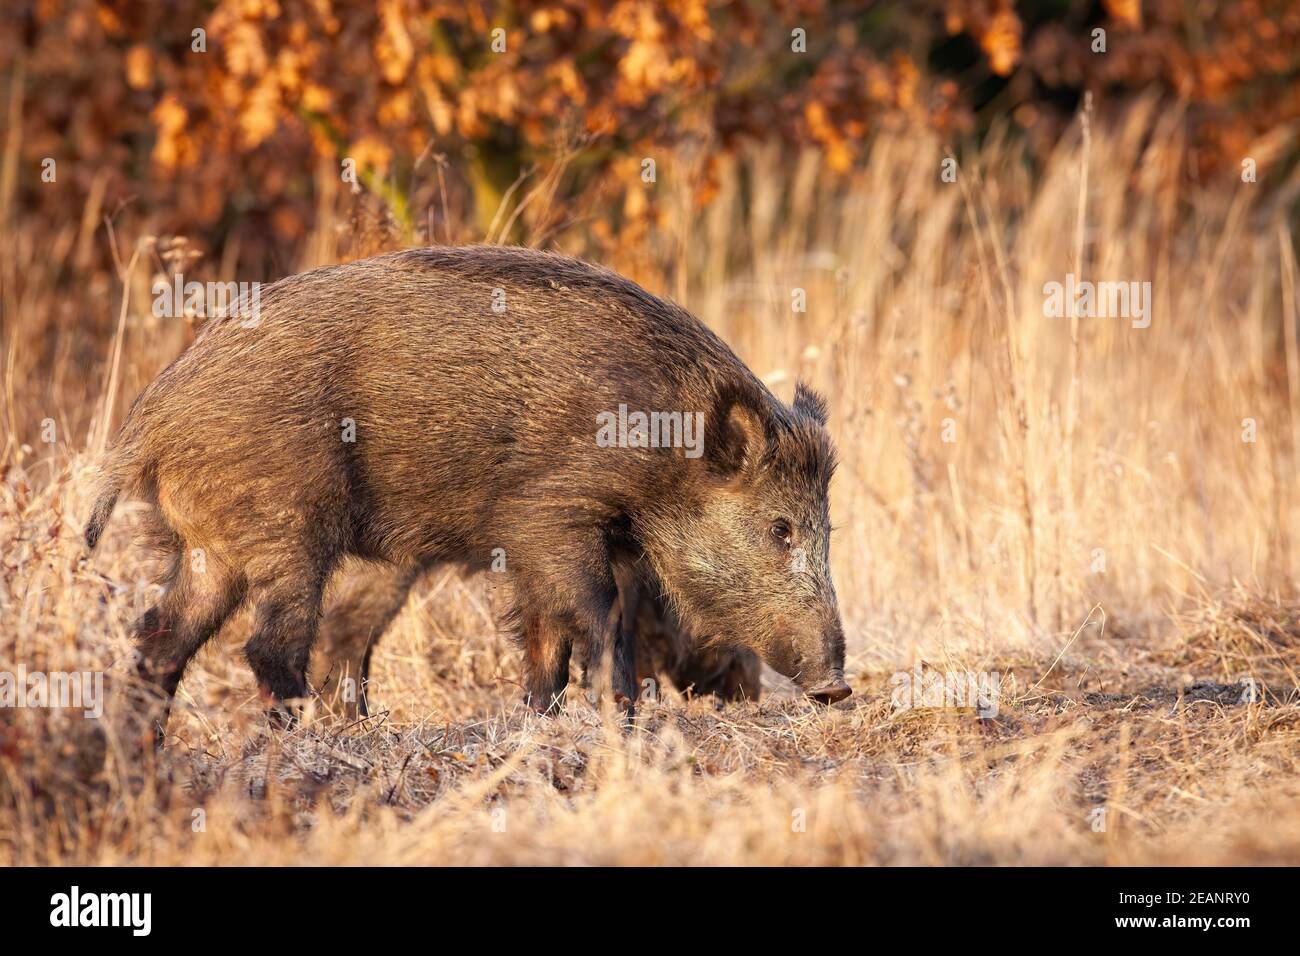 Wild boar sniffing on dry field in autumn nature. Stock Photo